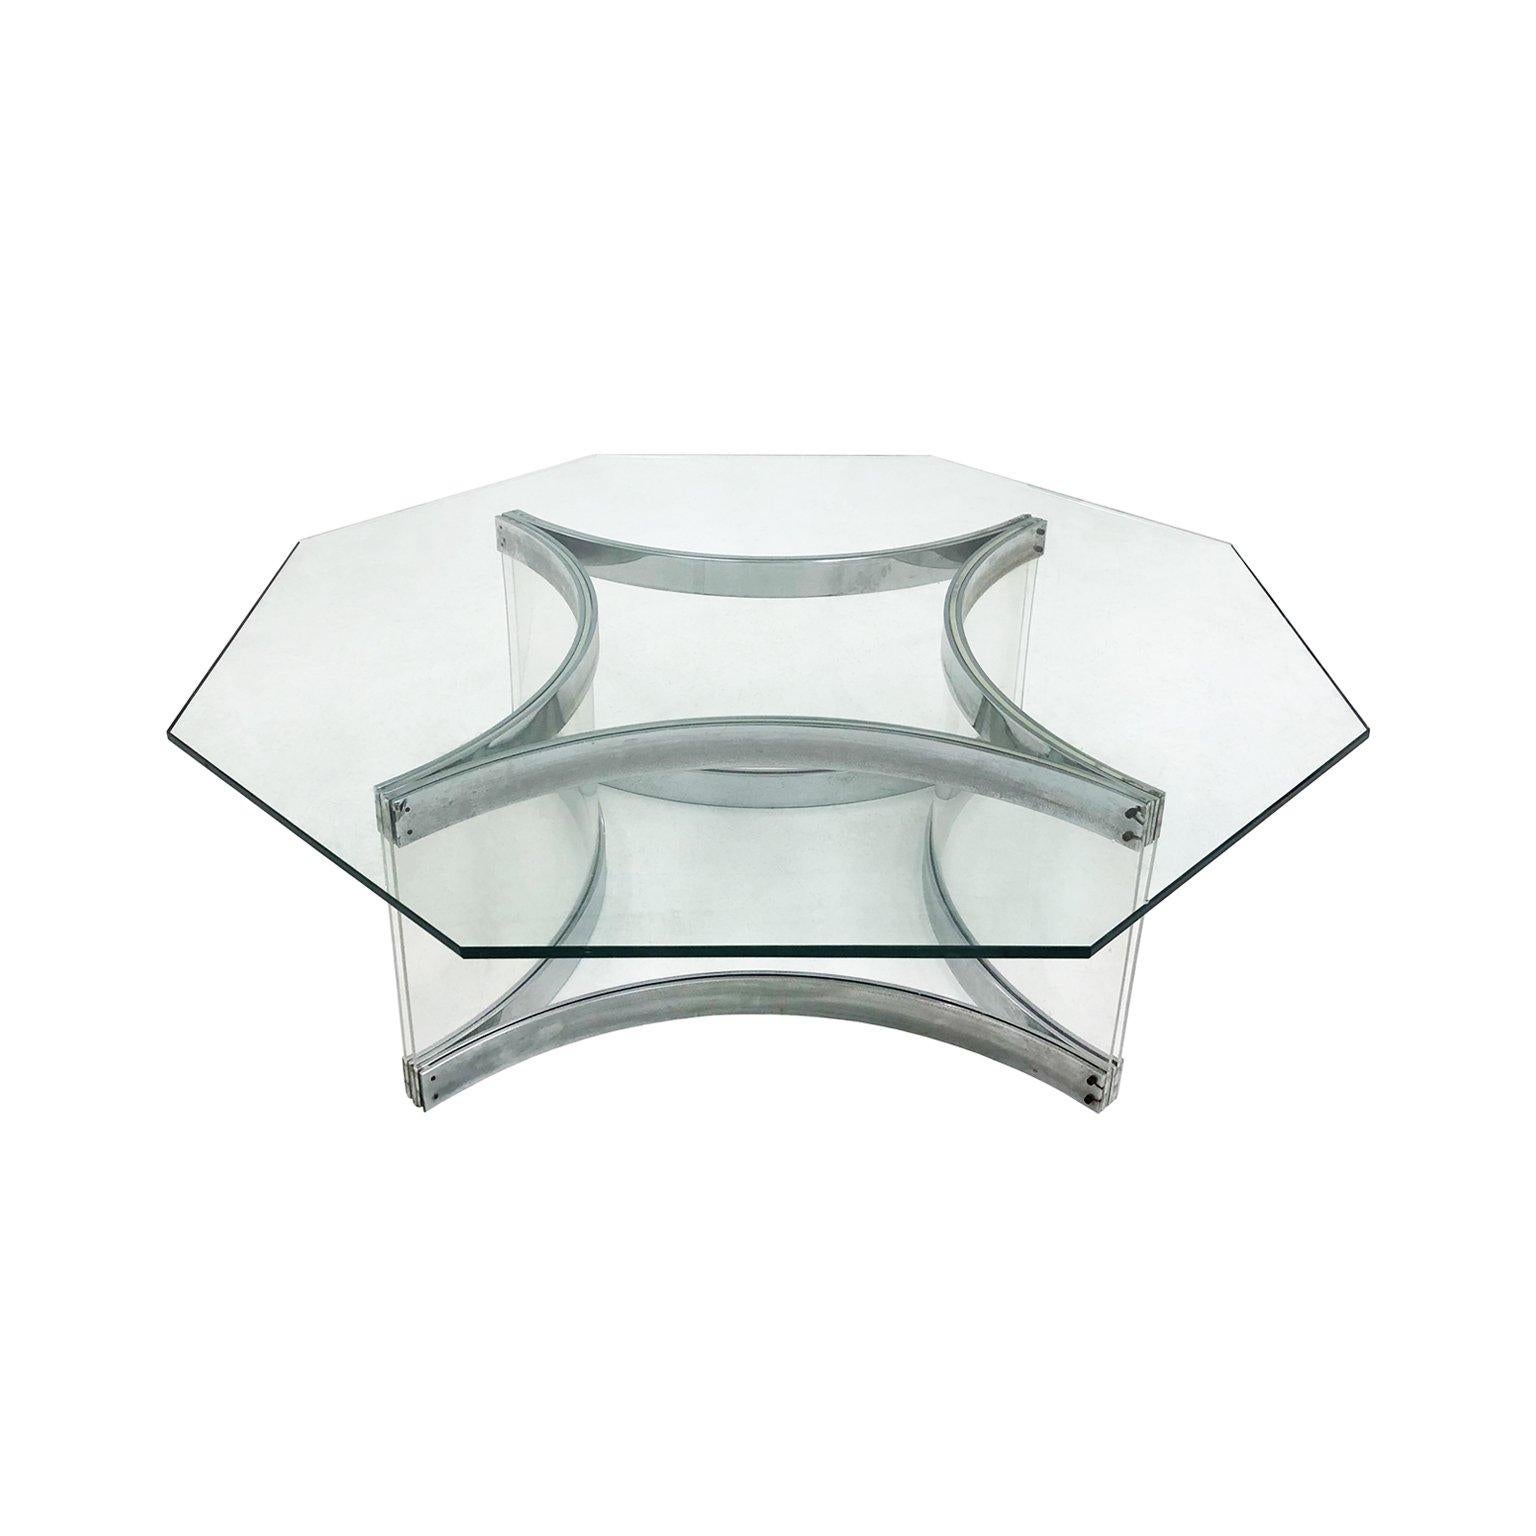 1970s Italian Octagonal Chrome and Lucite Coffee Table by Alessandro Albrizzi For Sale